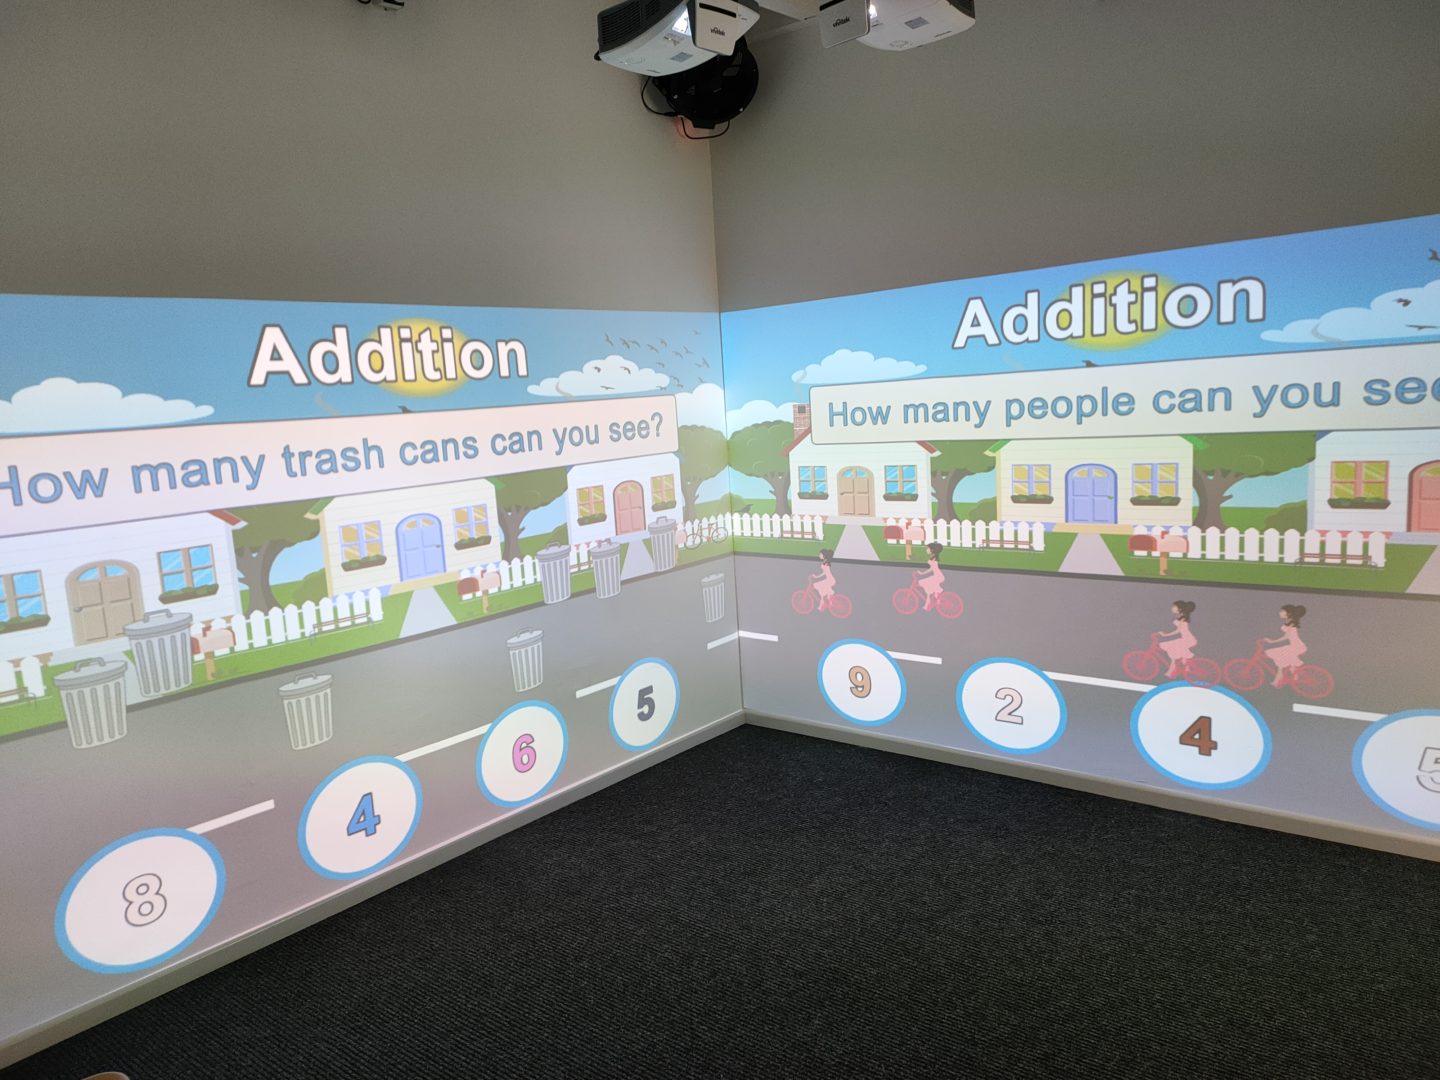 fully interactive immersive room including 2 interactive walls and a range of DMX sensory effect hardware. displaying educational numeracy activities